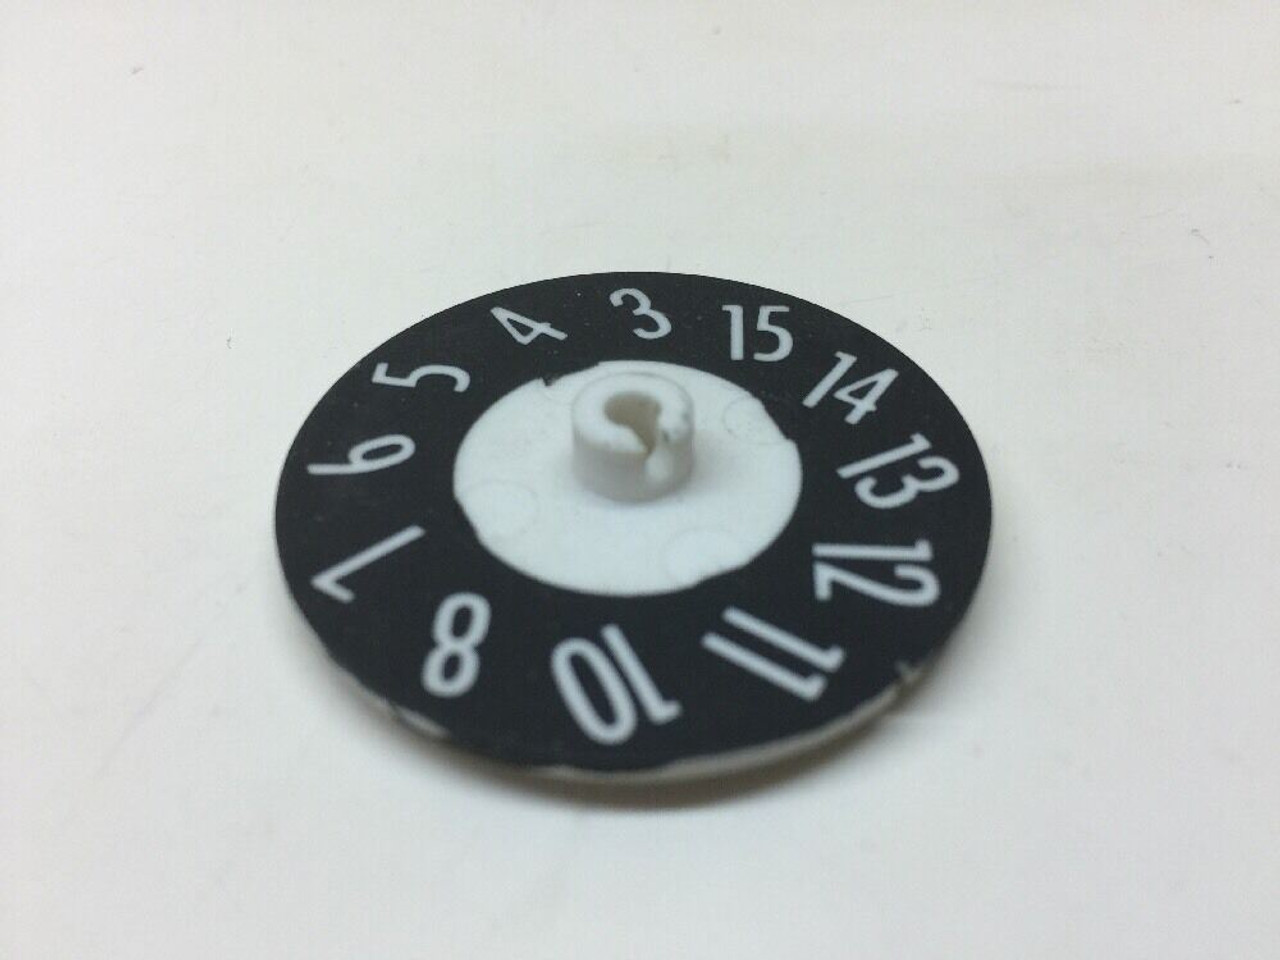 Scale Dial 638-2196-017 Rockwell Collins F-16 Aircraft